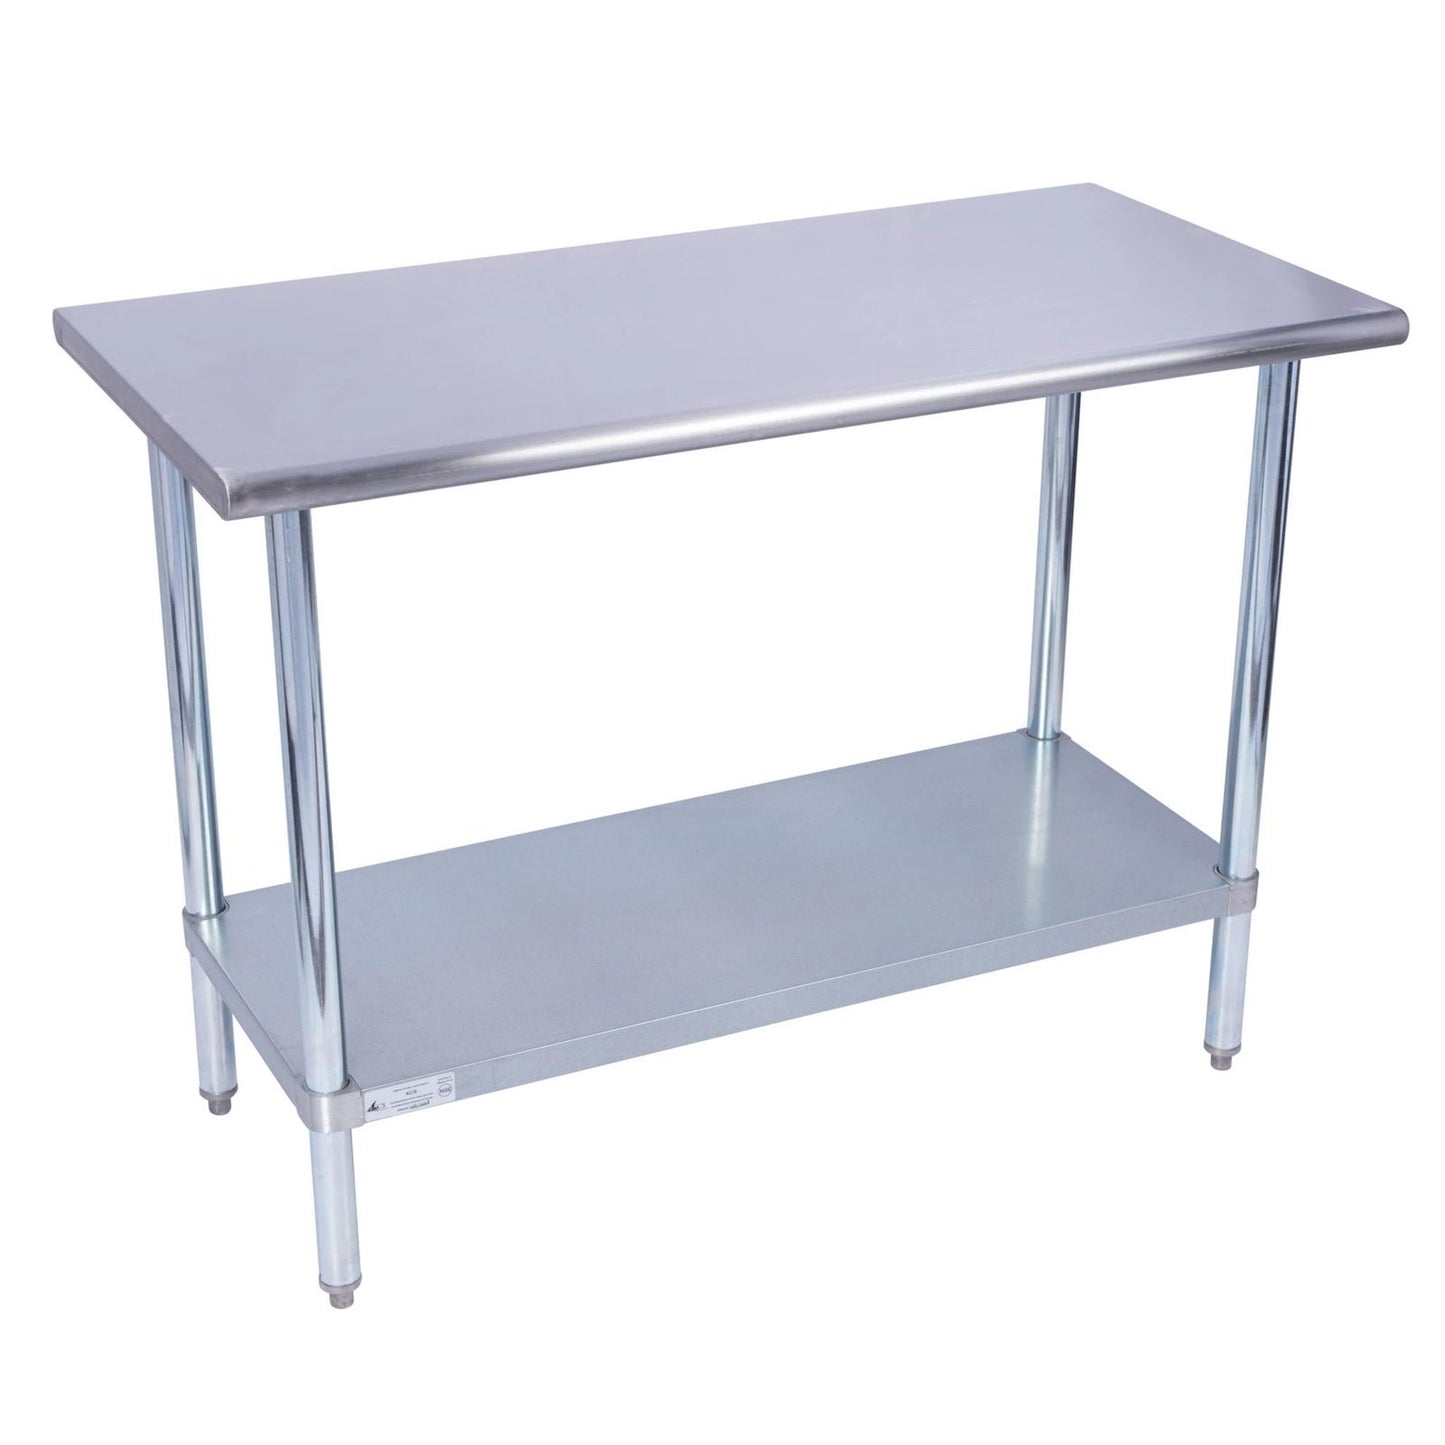 KCS 30" x 36" Stainless Steel Work Table with Galvanized Under Shelf